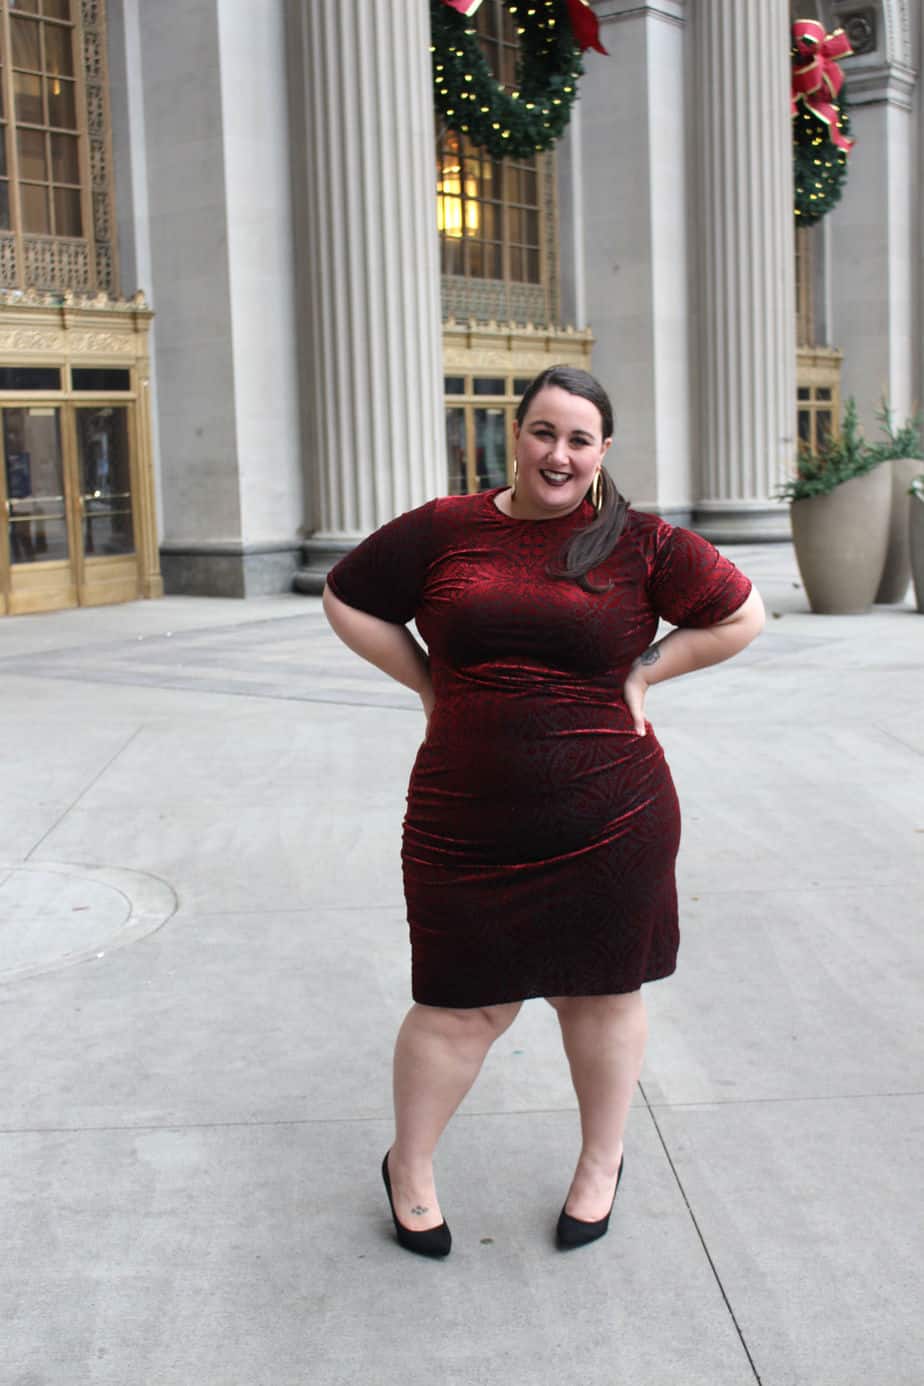 https://www.readytostare.com/wp-content/uploads/2016/12/Plus_Size_Dress_What_I_Wore_on_Christmas_Eve/Plus_Size_Dress_What_I_Wore_on_Christmas_Eve_02.jpg